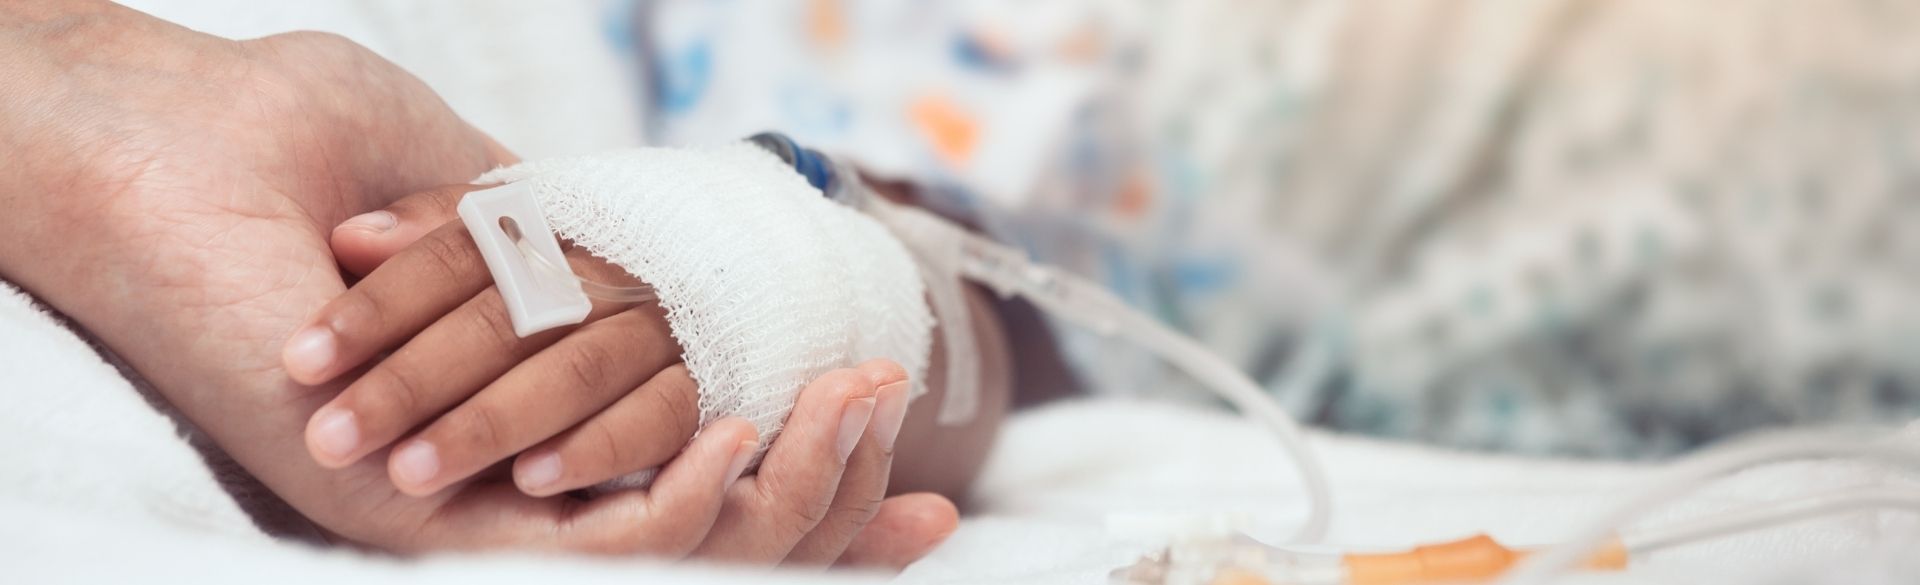 Caregiver hand holds child's gauze-wrapped hand with protruding IV tube